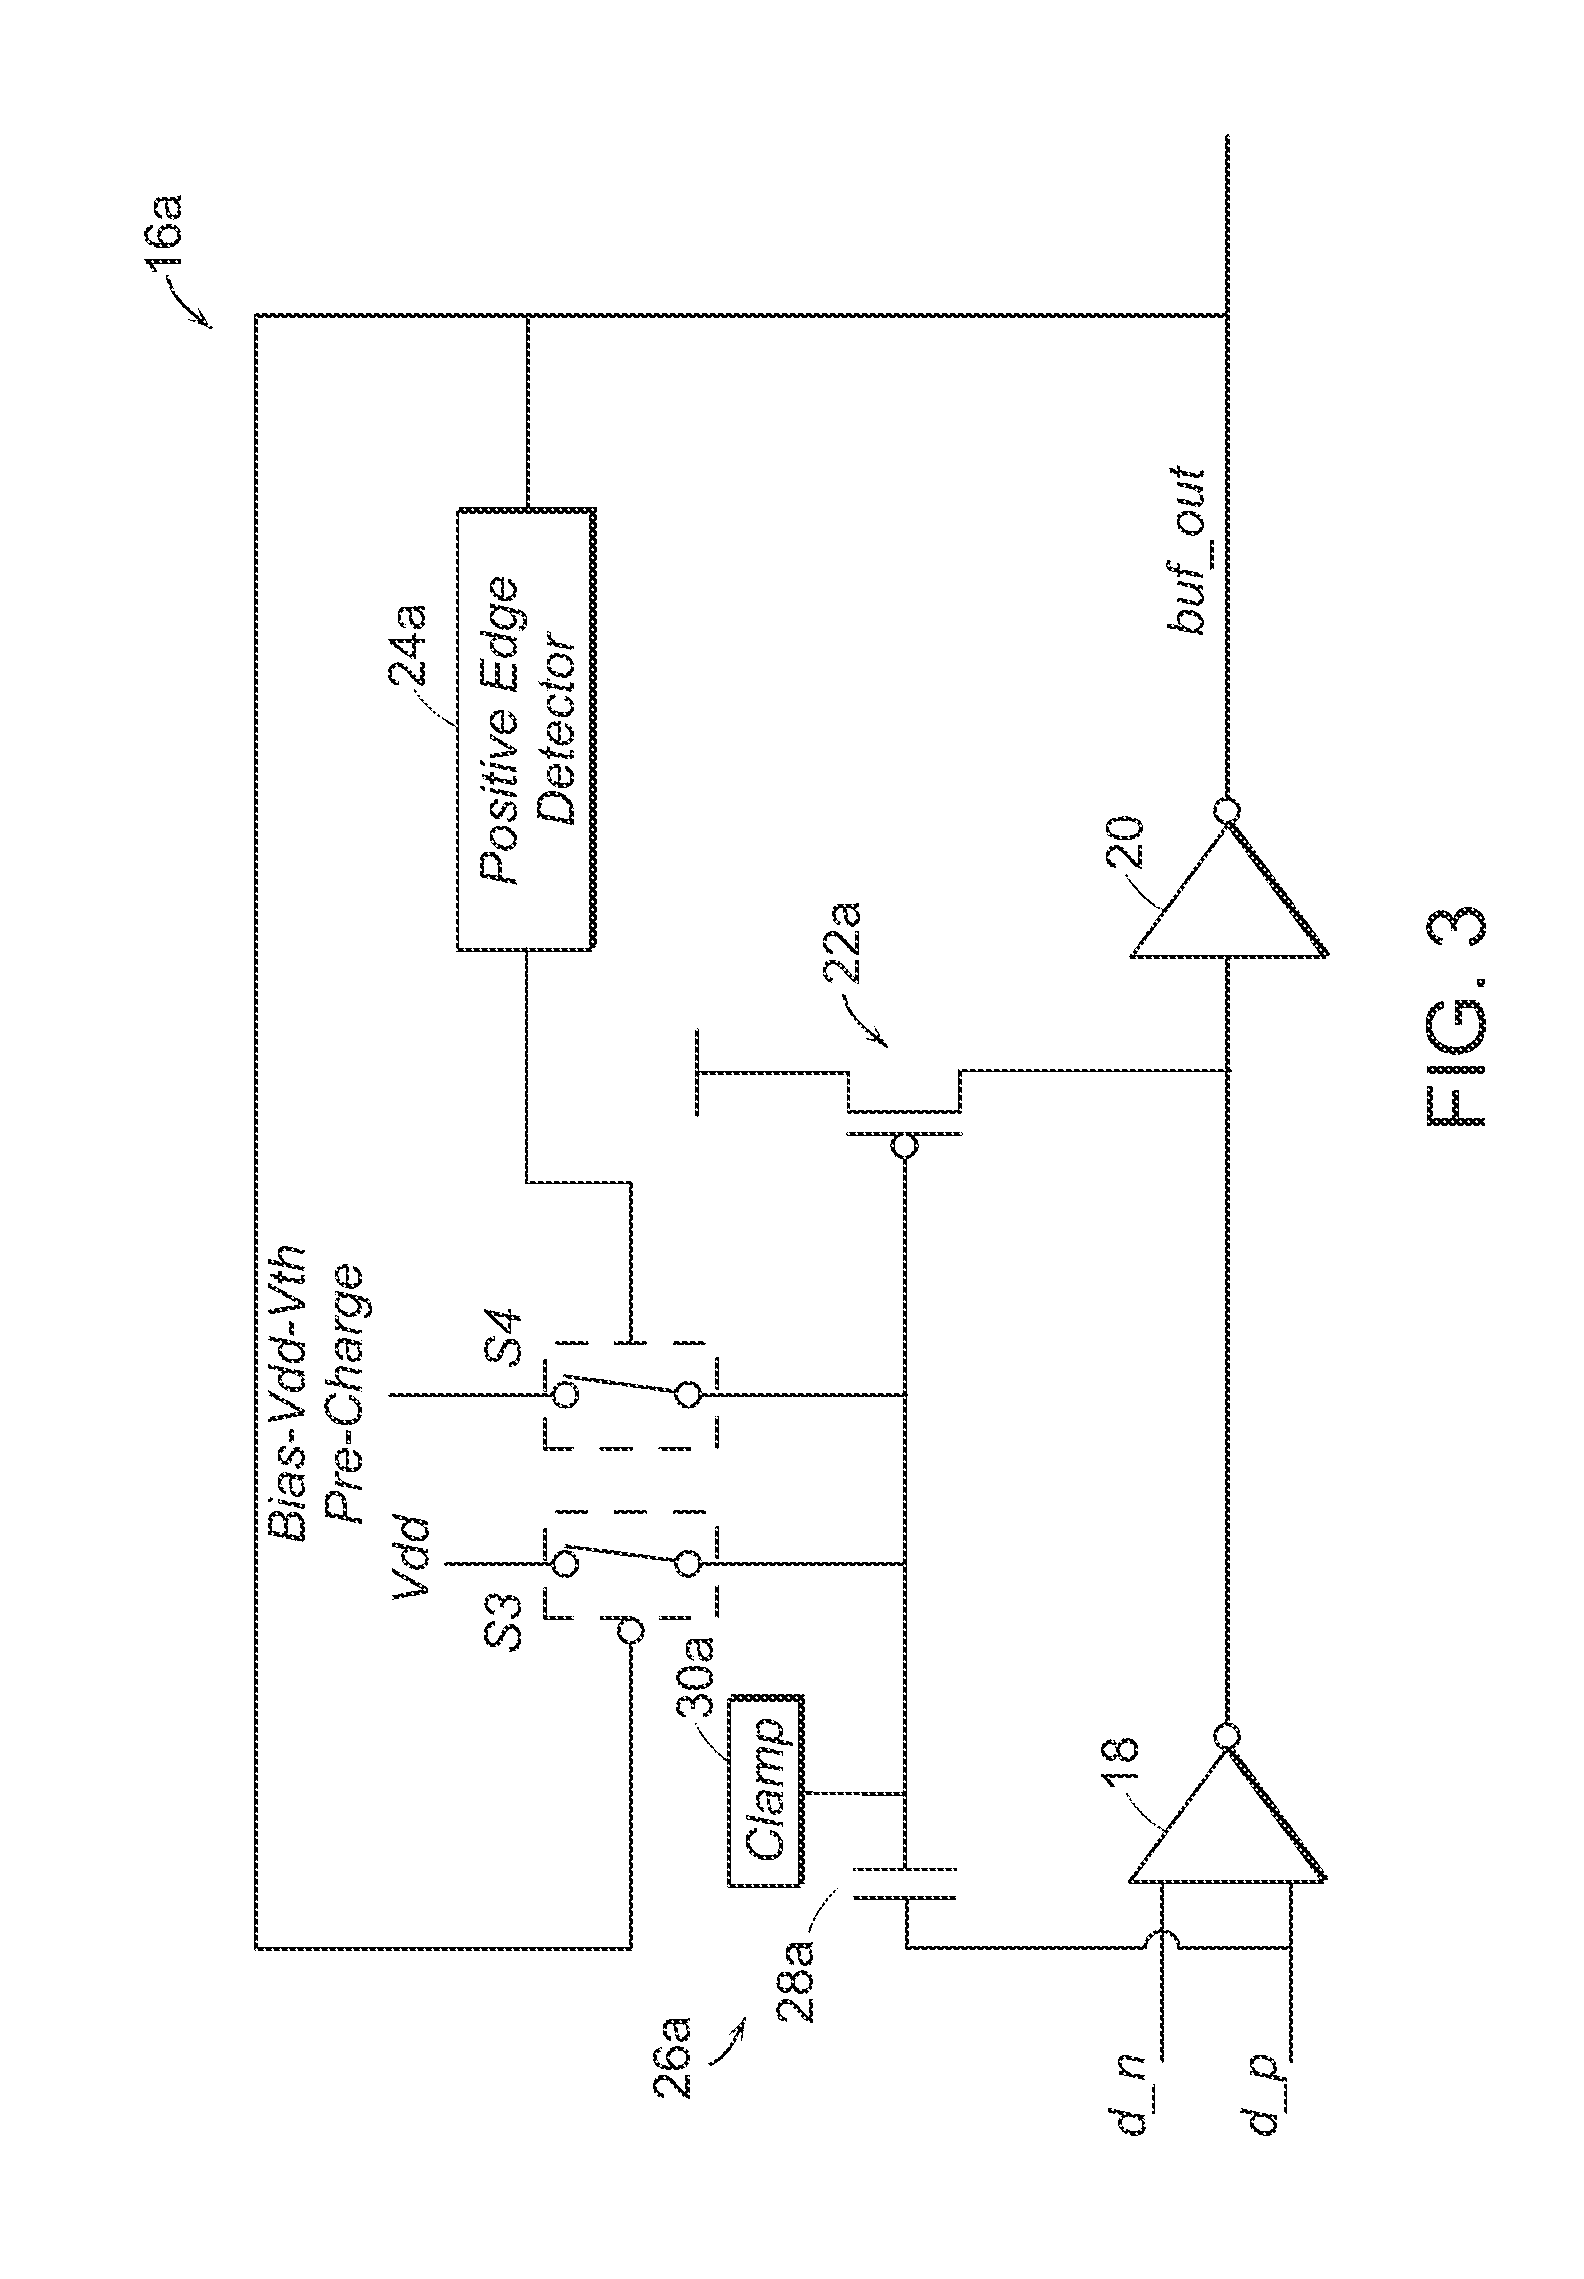 Capacitive feedforward circuit, system, and method to reduce buffer propagation delay